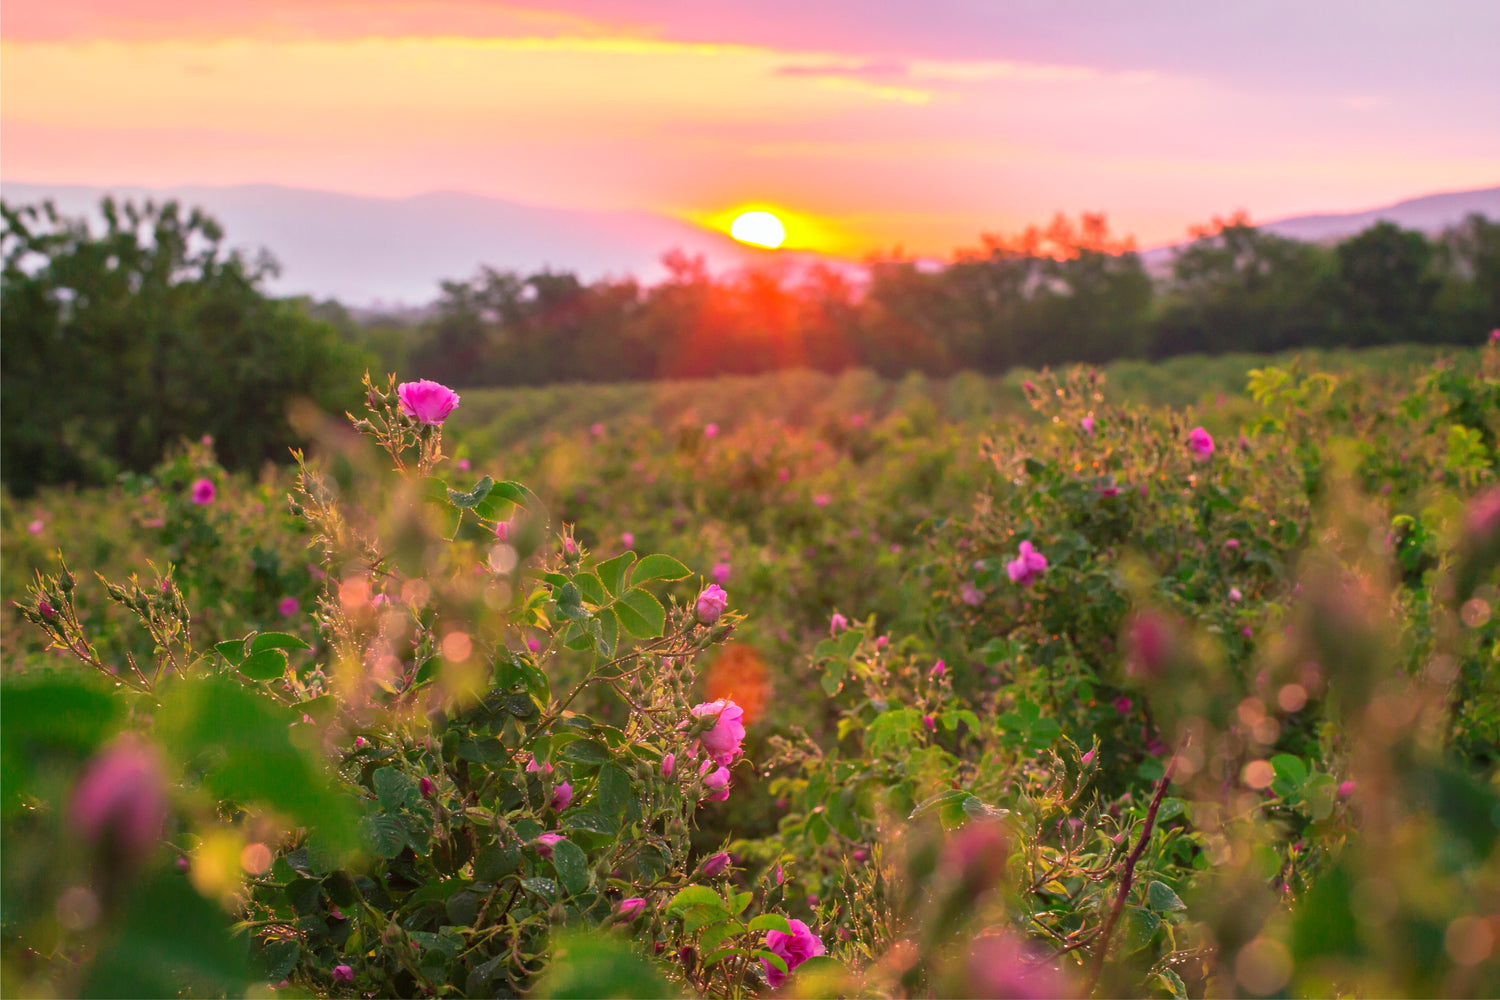 Sunset over a field of Bulgarian rose flowers.